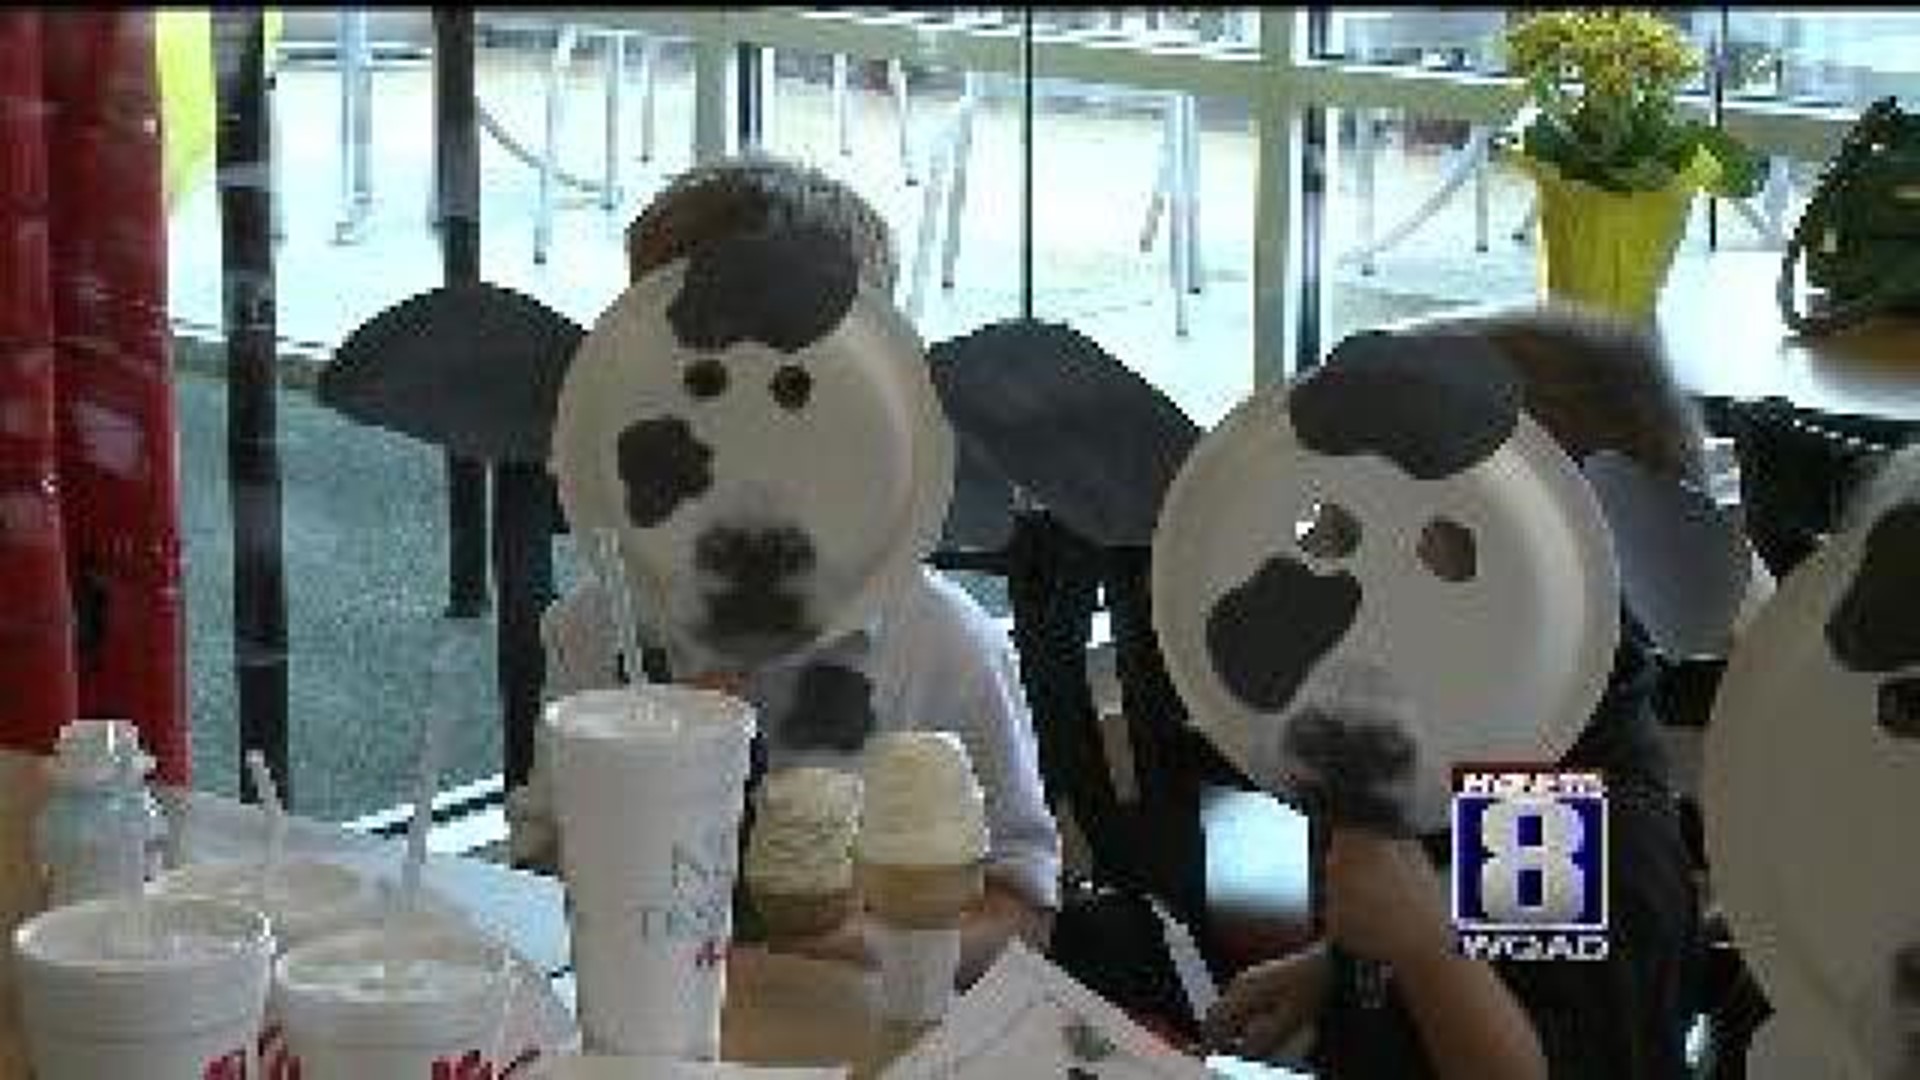 Cow costumes for free food